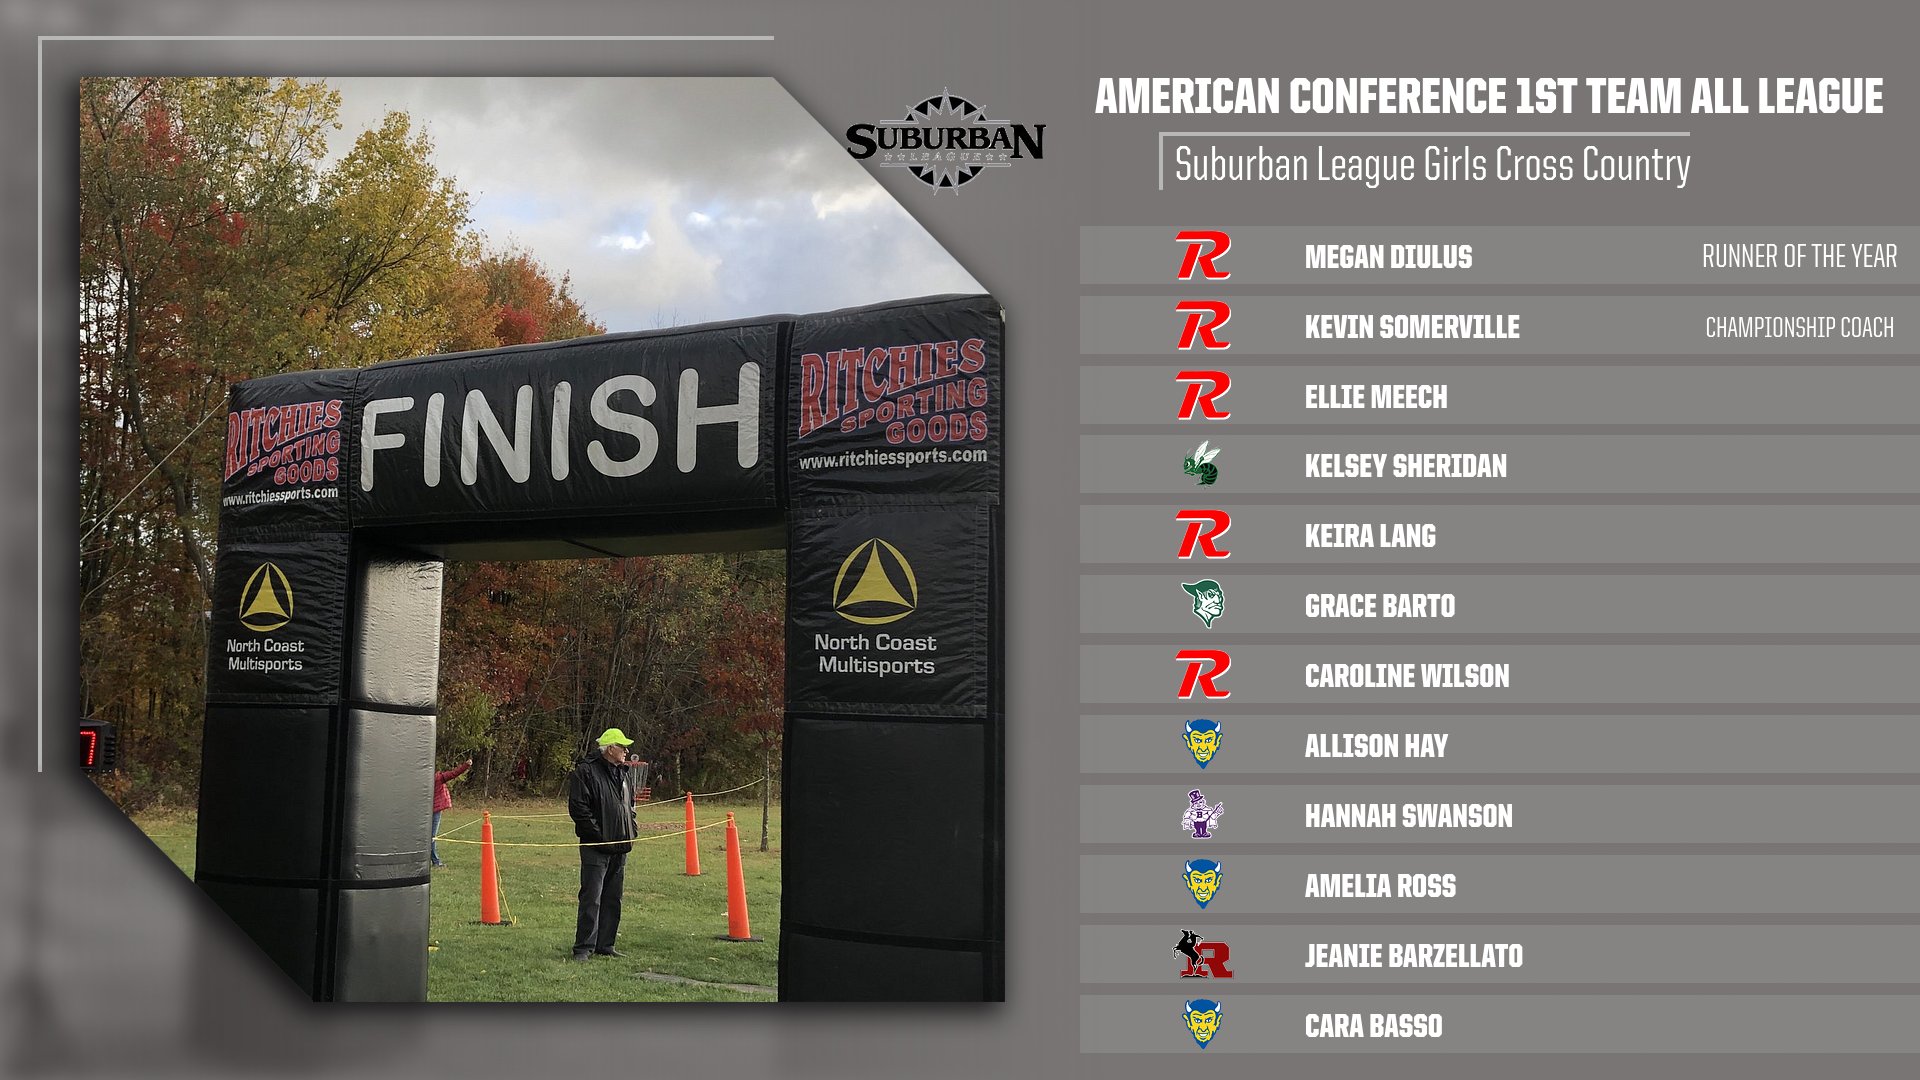 2022 Suburban League Awards American Conference Girls Cross Country